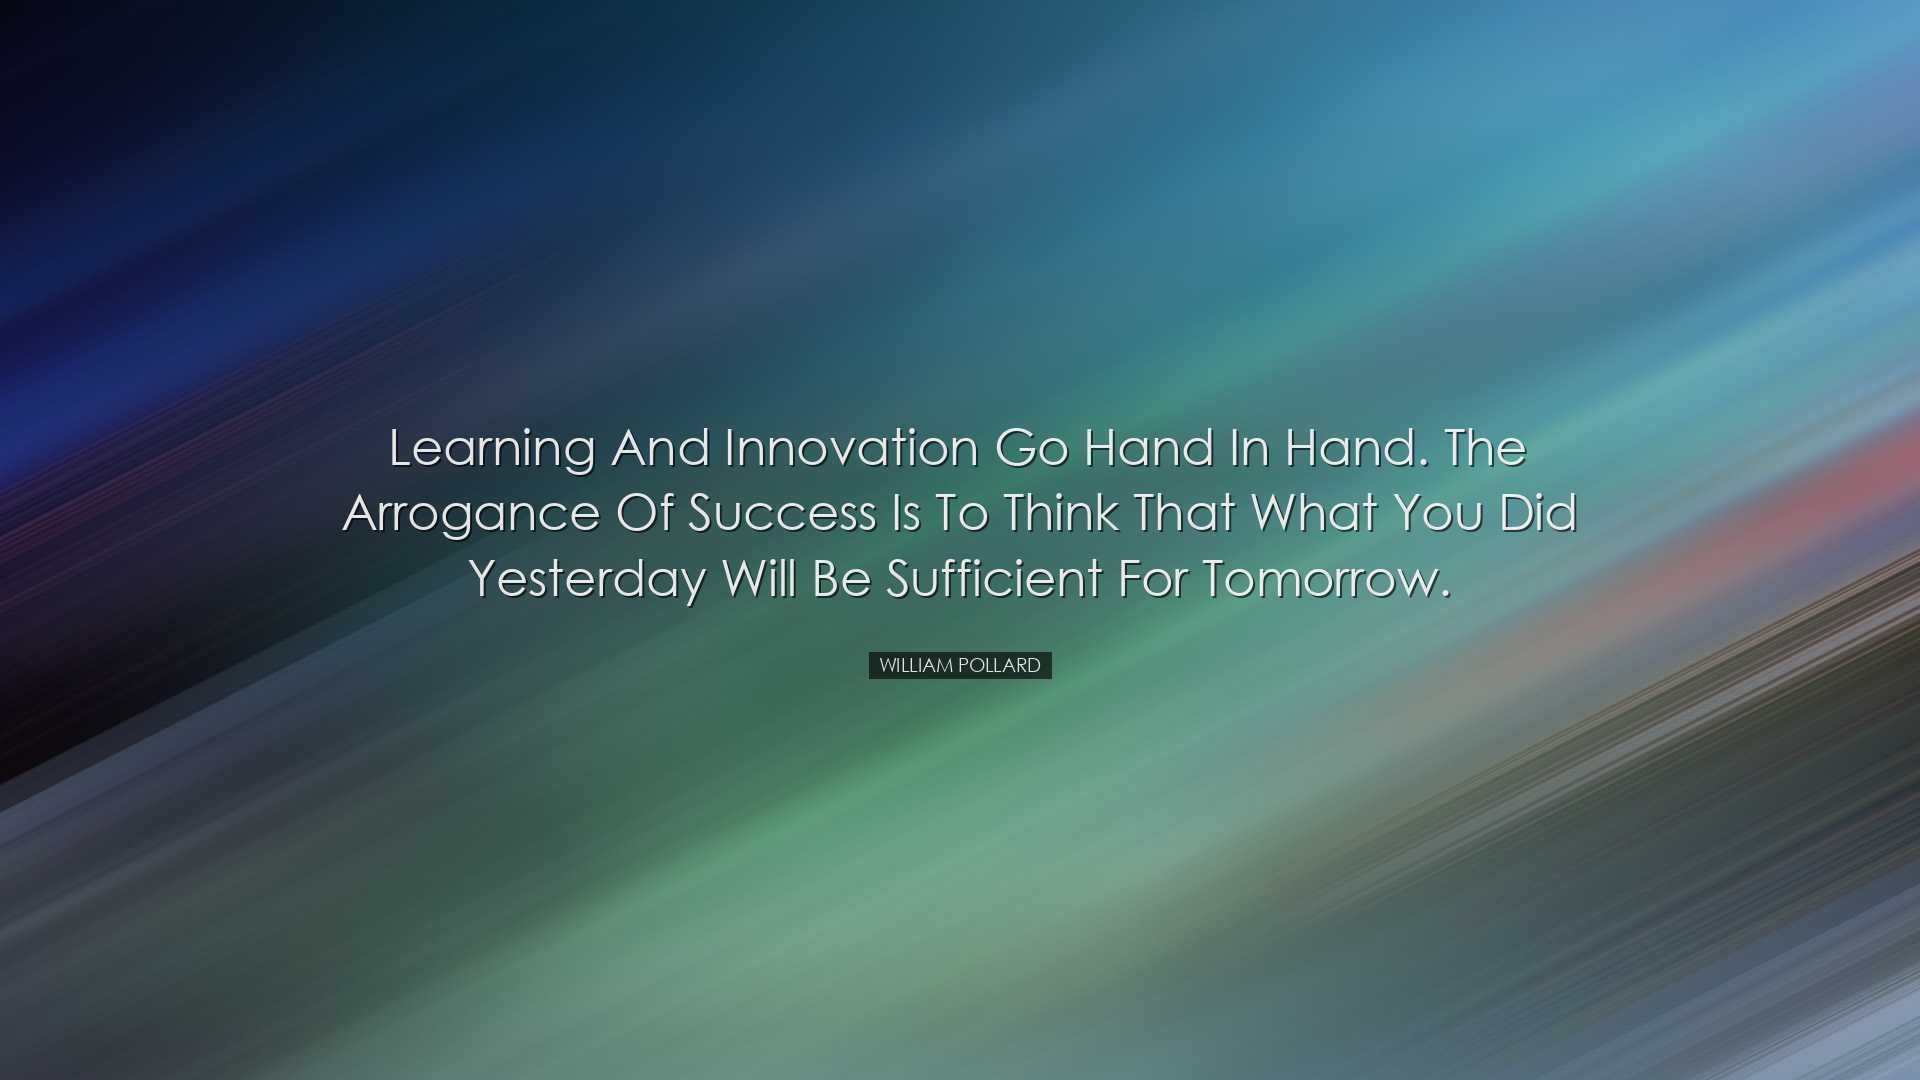 Learning and innovation go hand in hand. The arrogance of success